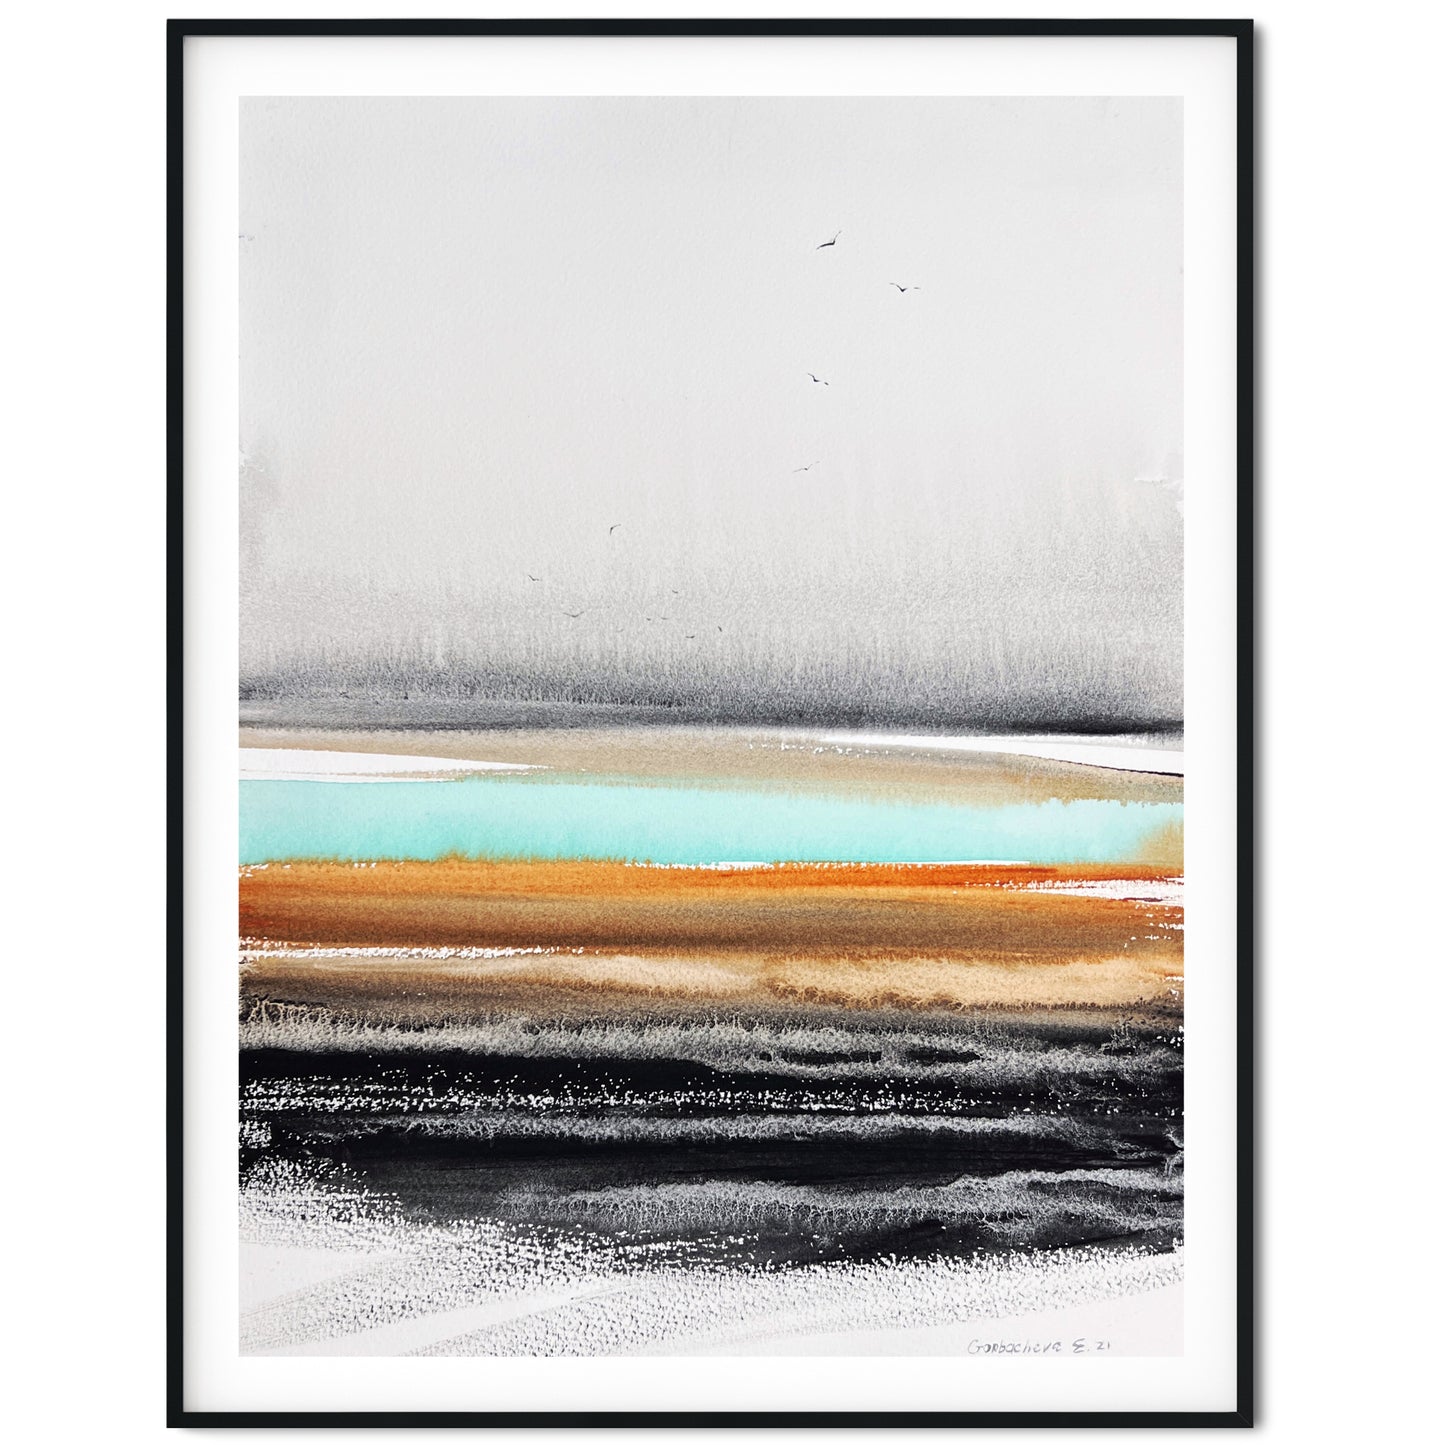 Abstract Landscape Watercolor Painting - River Valley in Burnt Orange